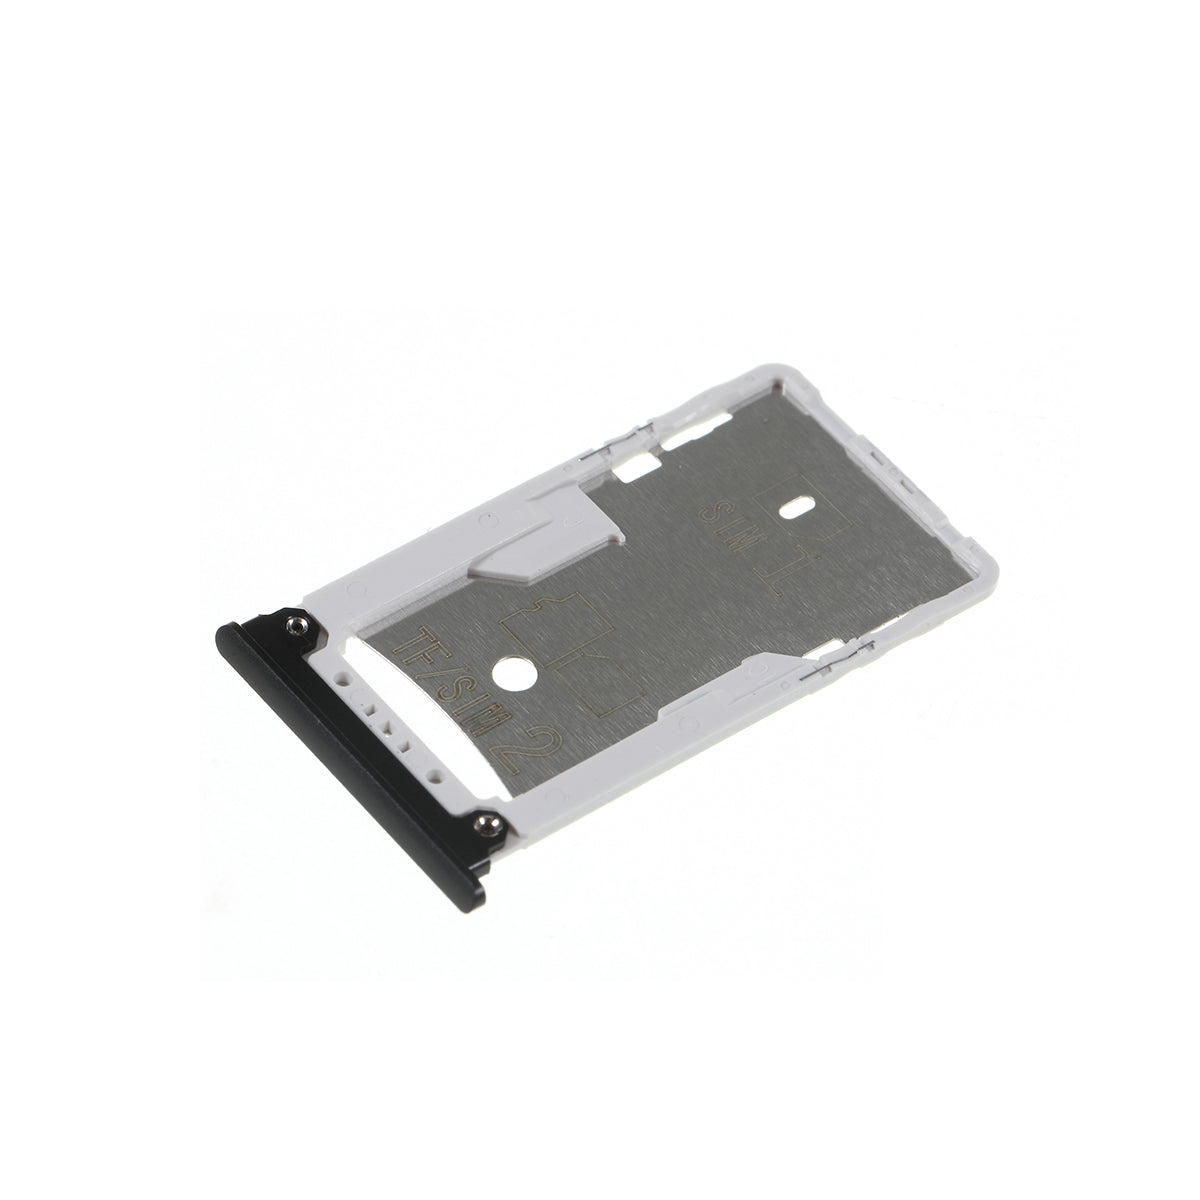 OEM SIM Card Tray Holder Replace Part for Xiaomi Mi Max 2 - Black